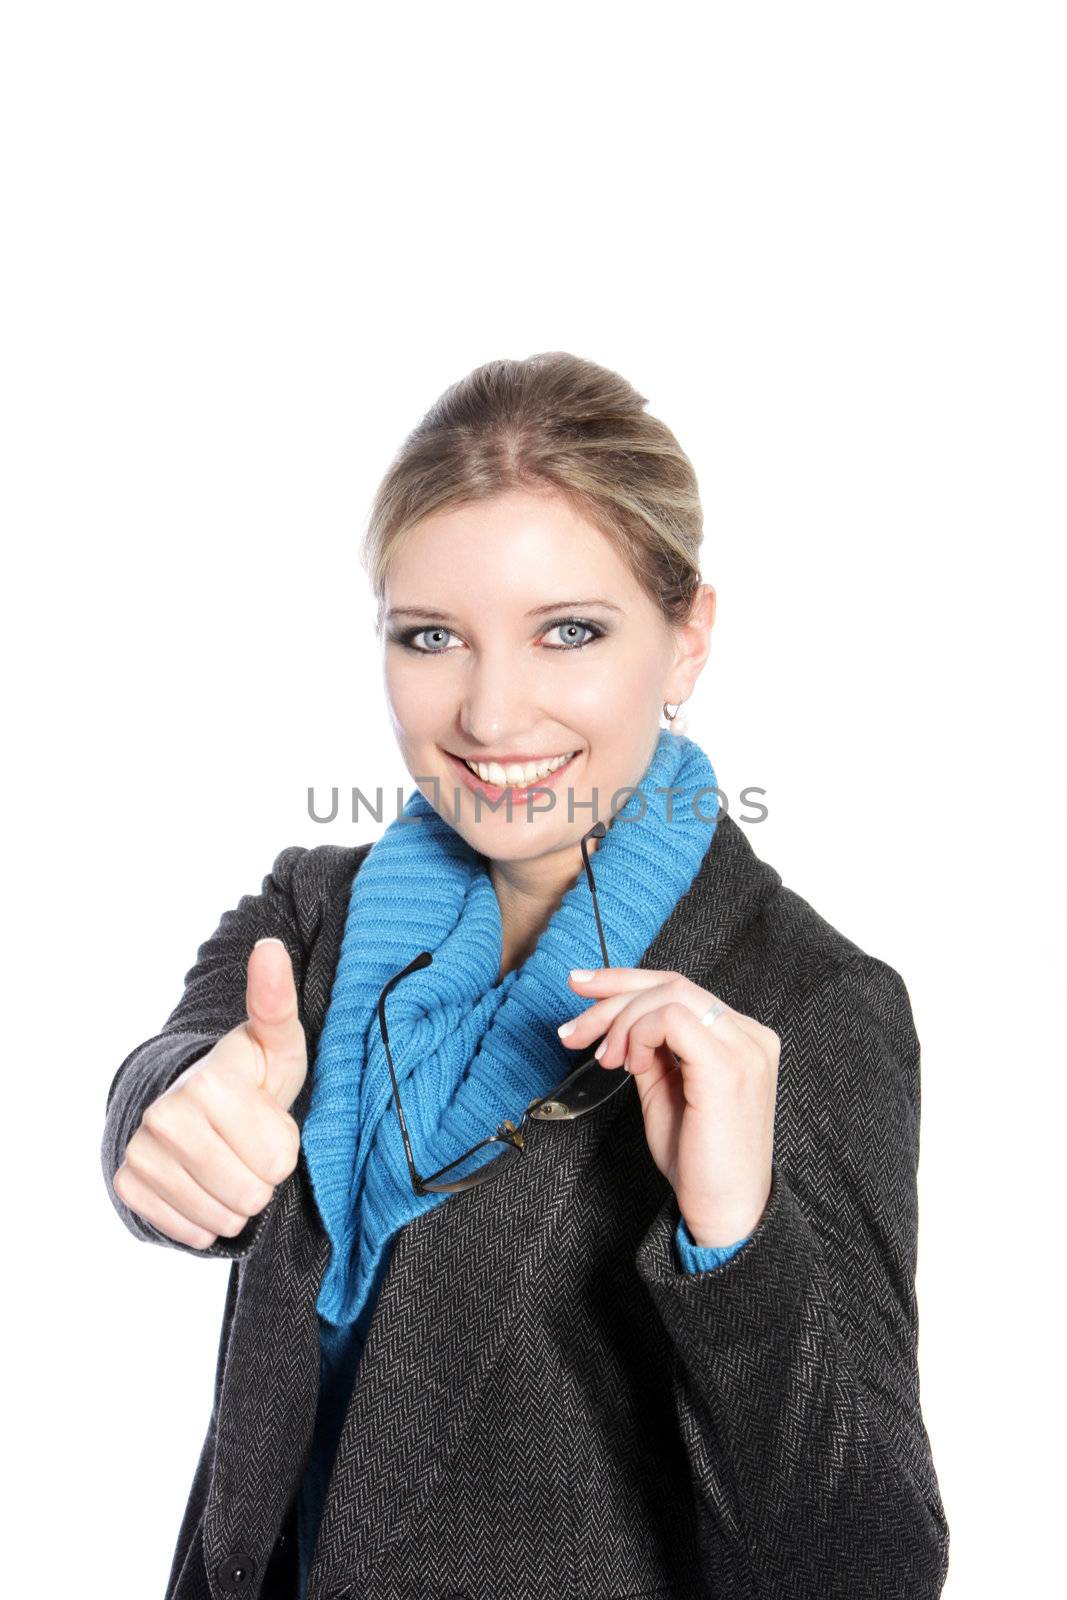 Beautiful blond woman in winter attire giving a thumbs up to show that everything is going well and has her approval isolated on white